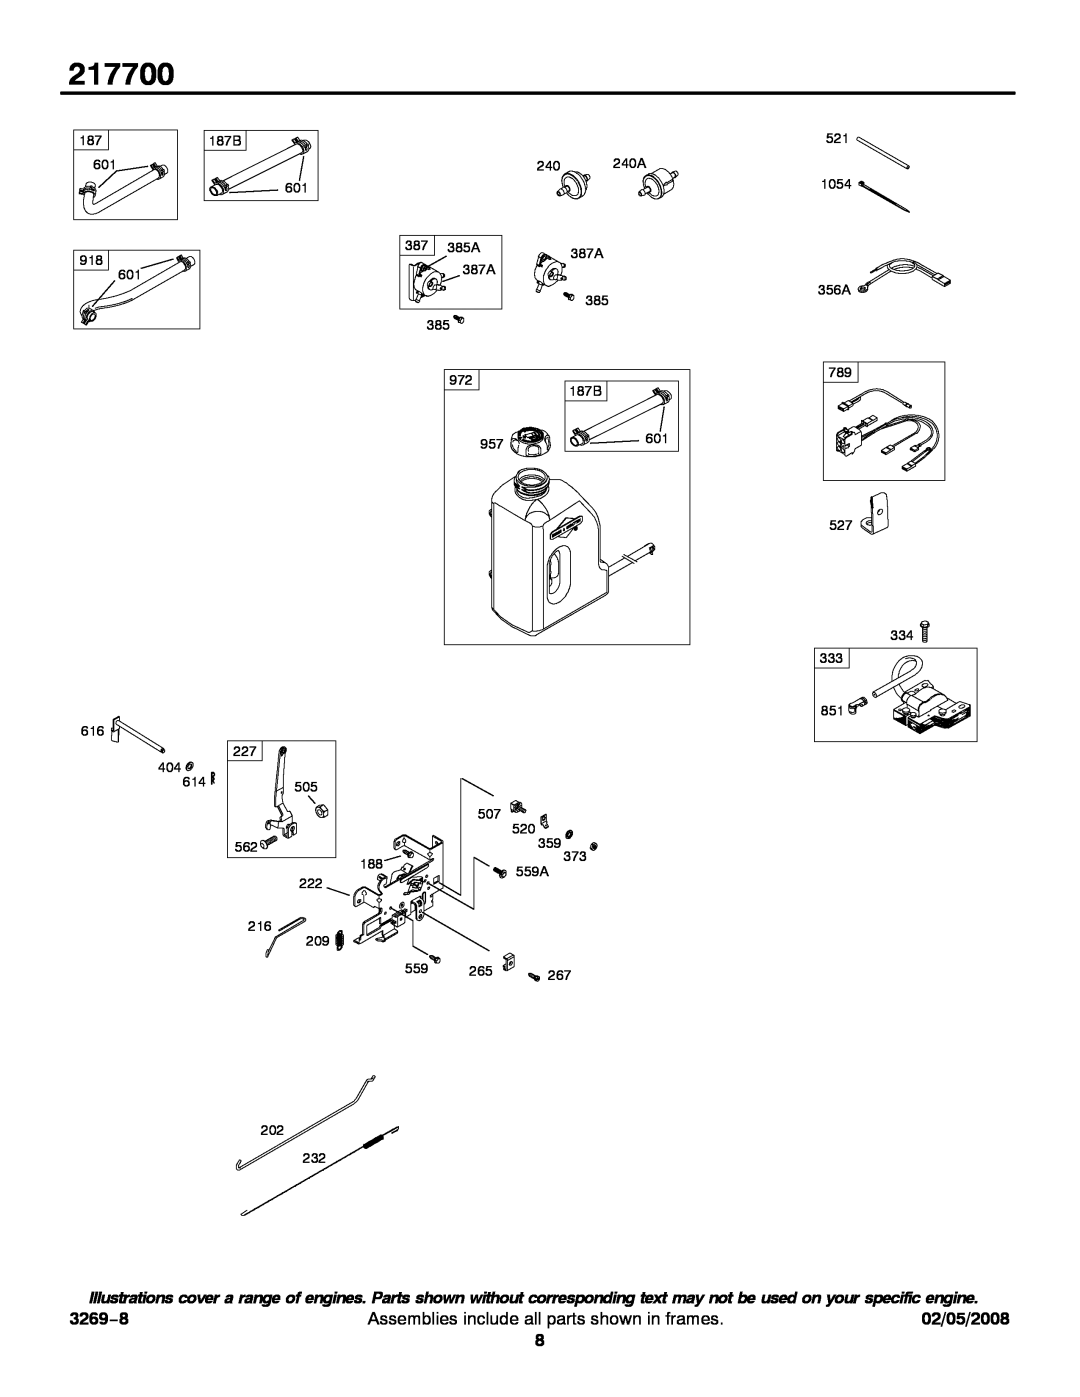 Briggs & Stratton 217700 service manual 3269−8, Assemblies include all parts shown in frames, 02/05/2008 